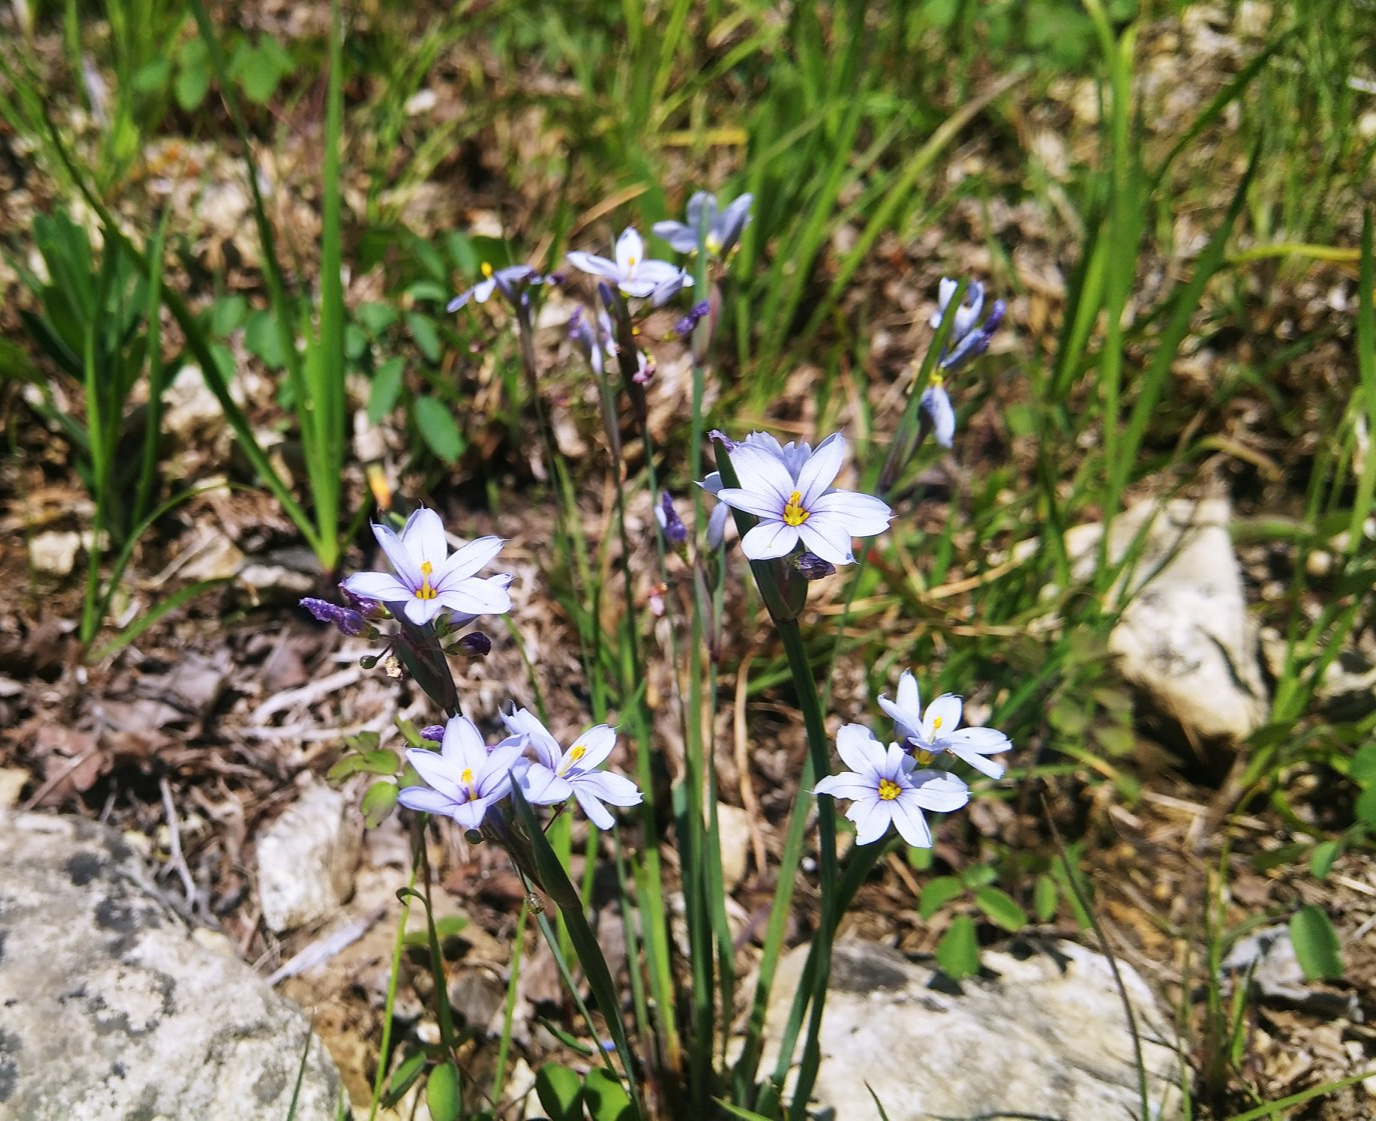 Blue Eyed Grass Flower along the Rose Island Trail in Charlestown State Park